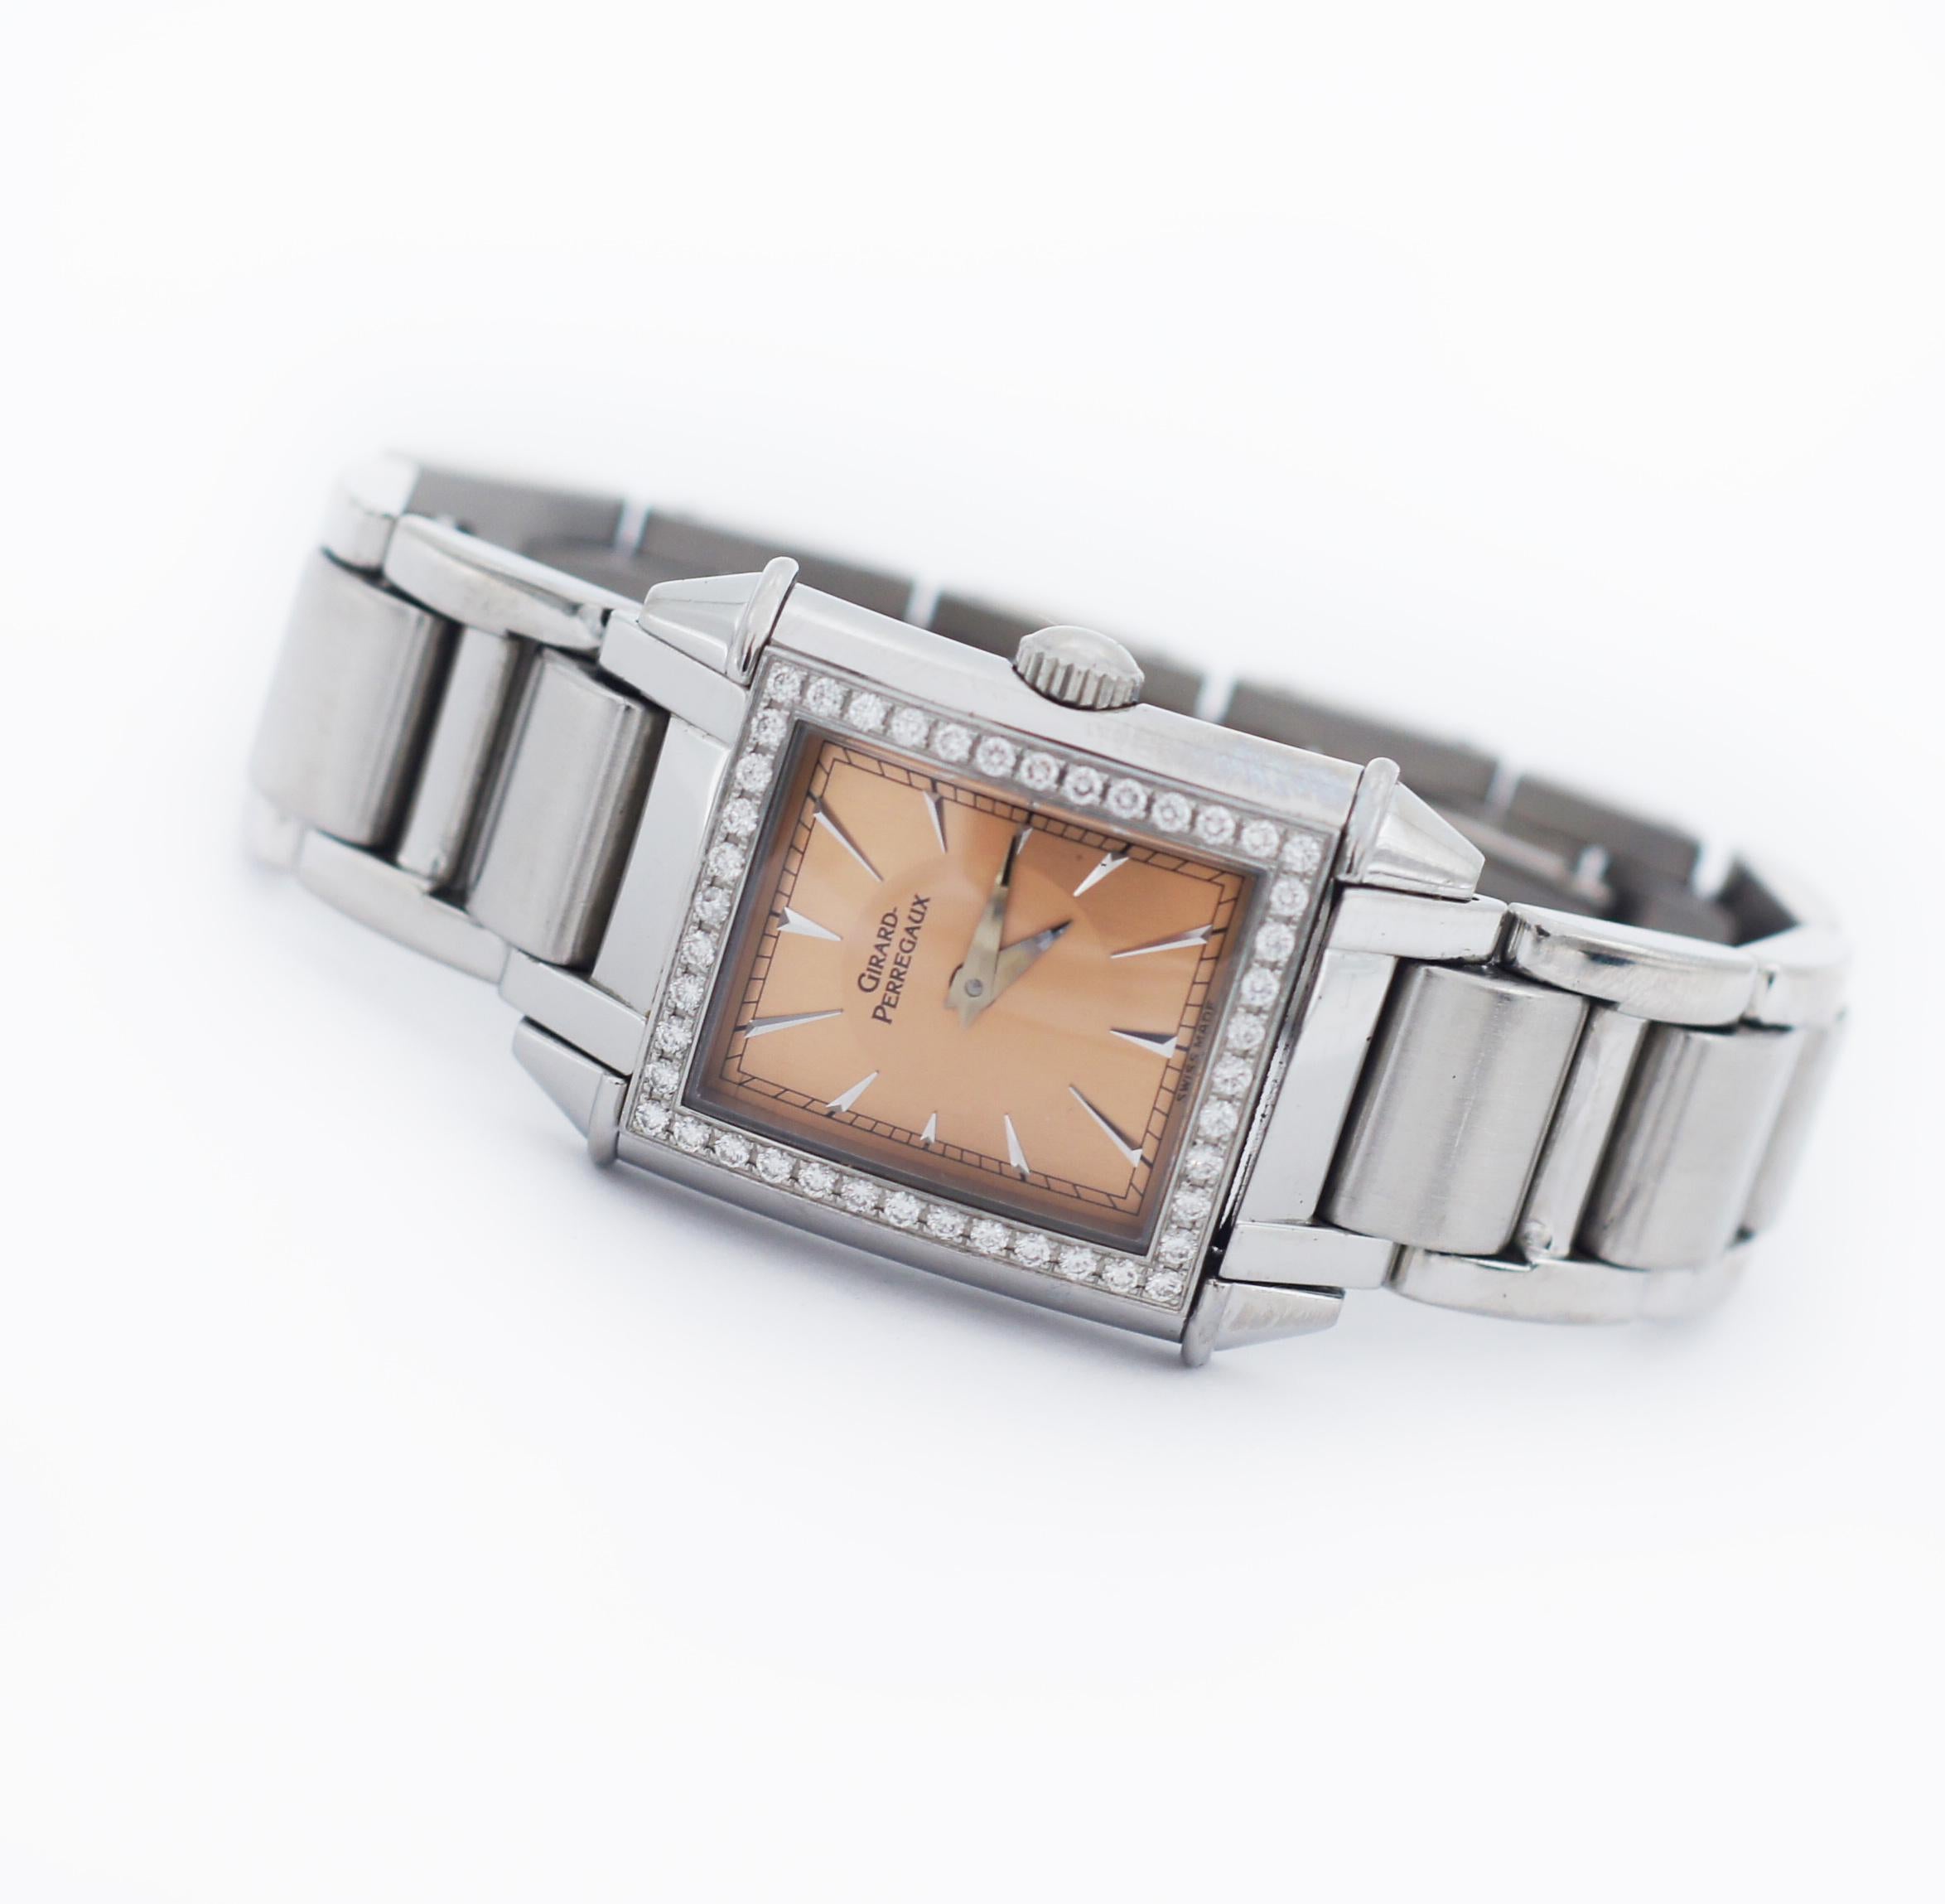 Girard Perregaux
Model Vintage 1945
Reference number 2592
Movement Quartz
Case material Stainless Steel
Case diameter Approx. 23 x 23.5 mm
Crystal Sapphire crystal
Dial Pink/ Salmon
Stainless Steel Markers
Single Row Diamond bezel
Bracelet material